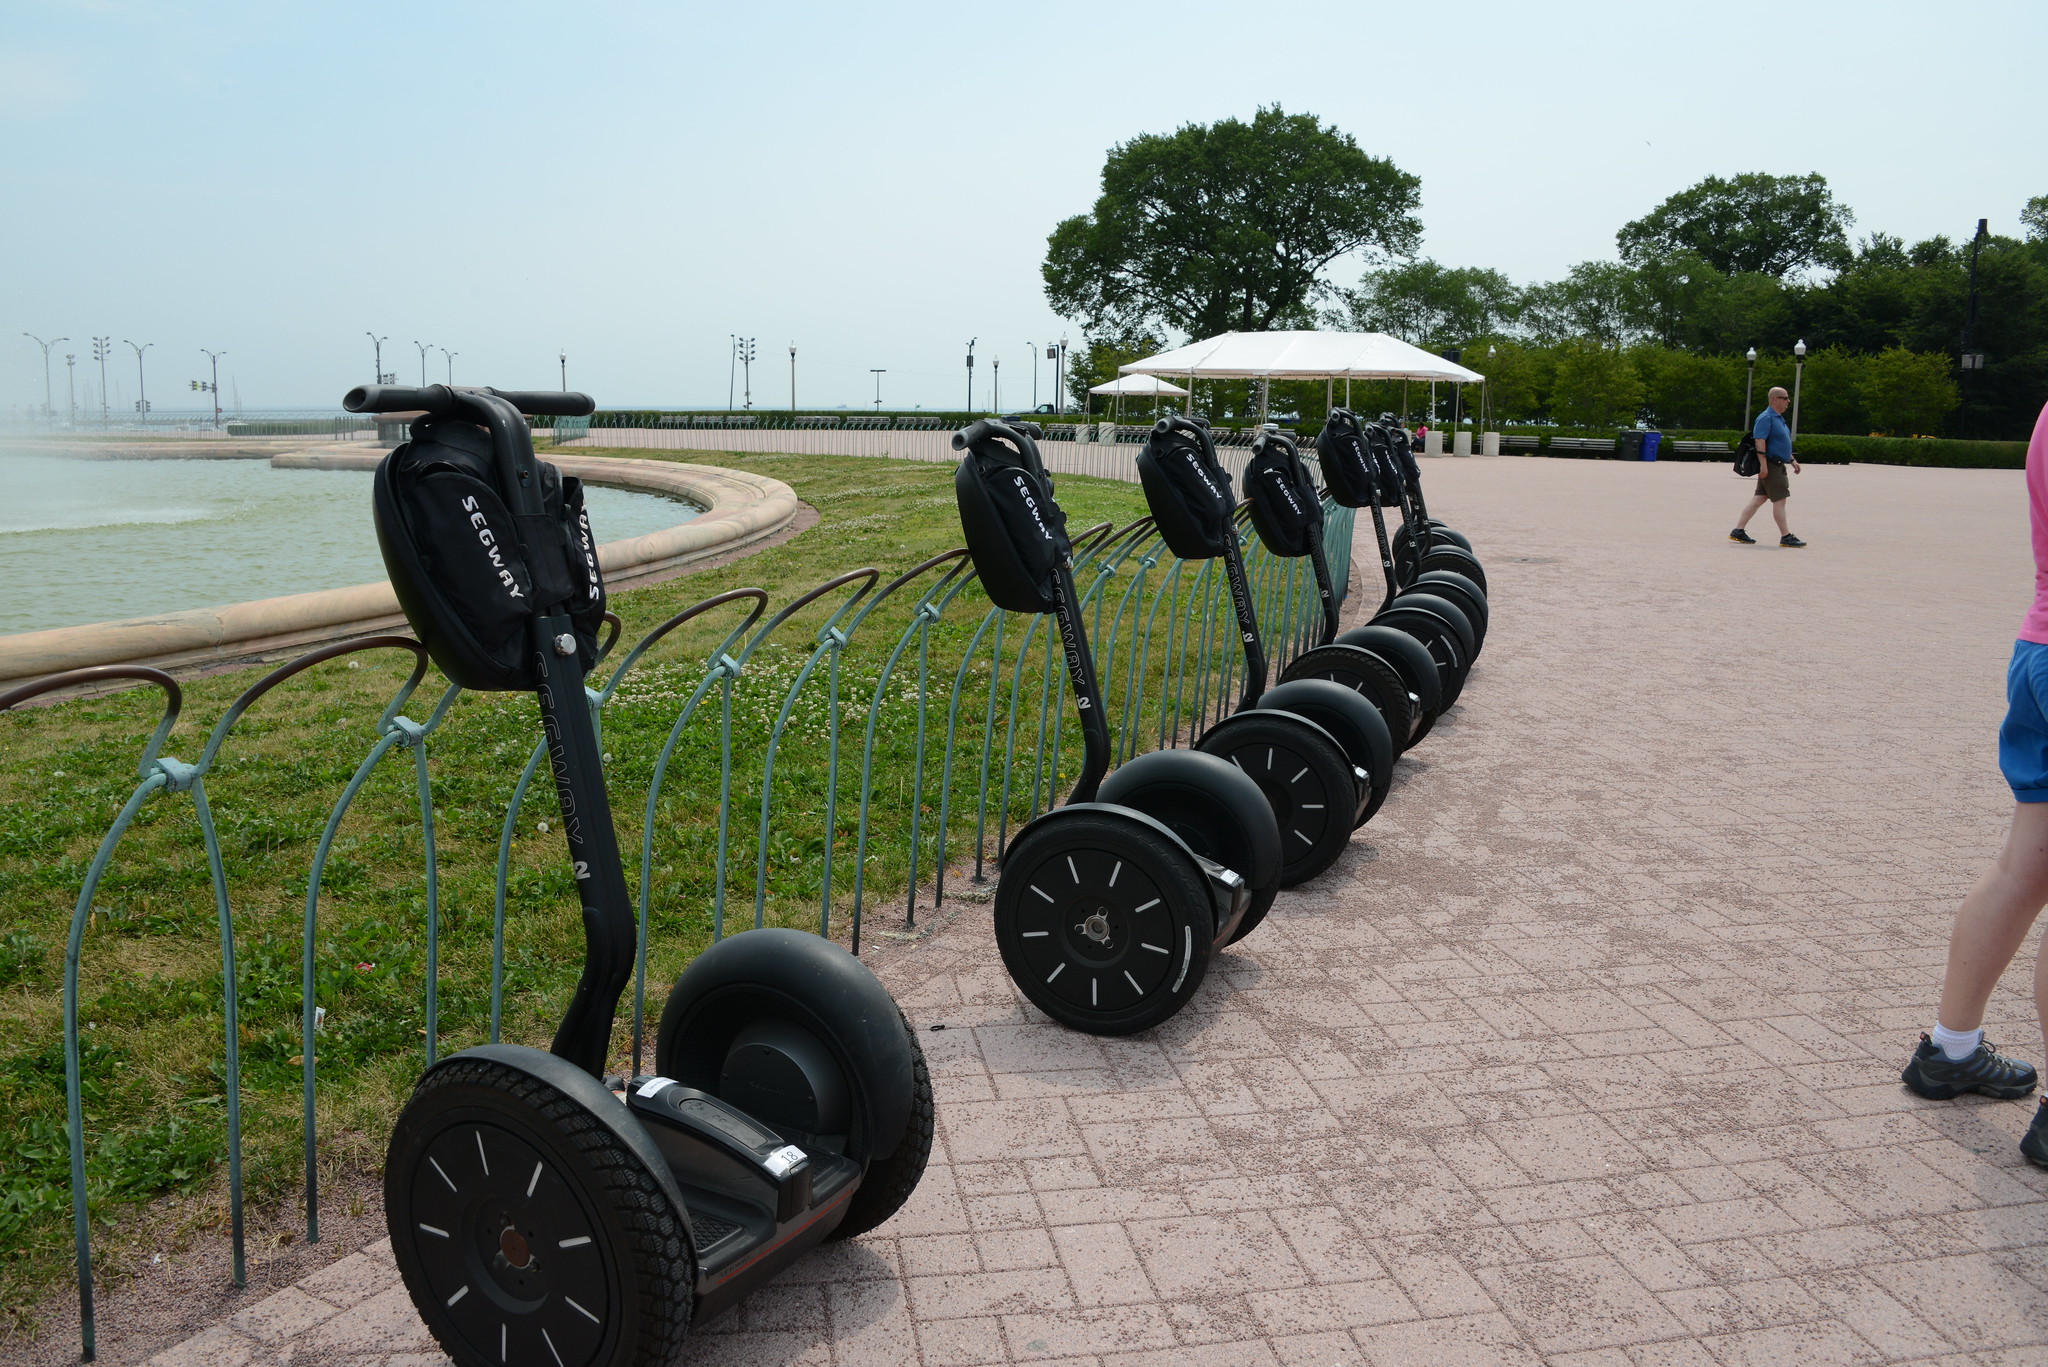 Segway day in Chicago!